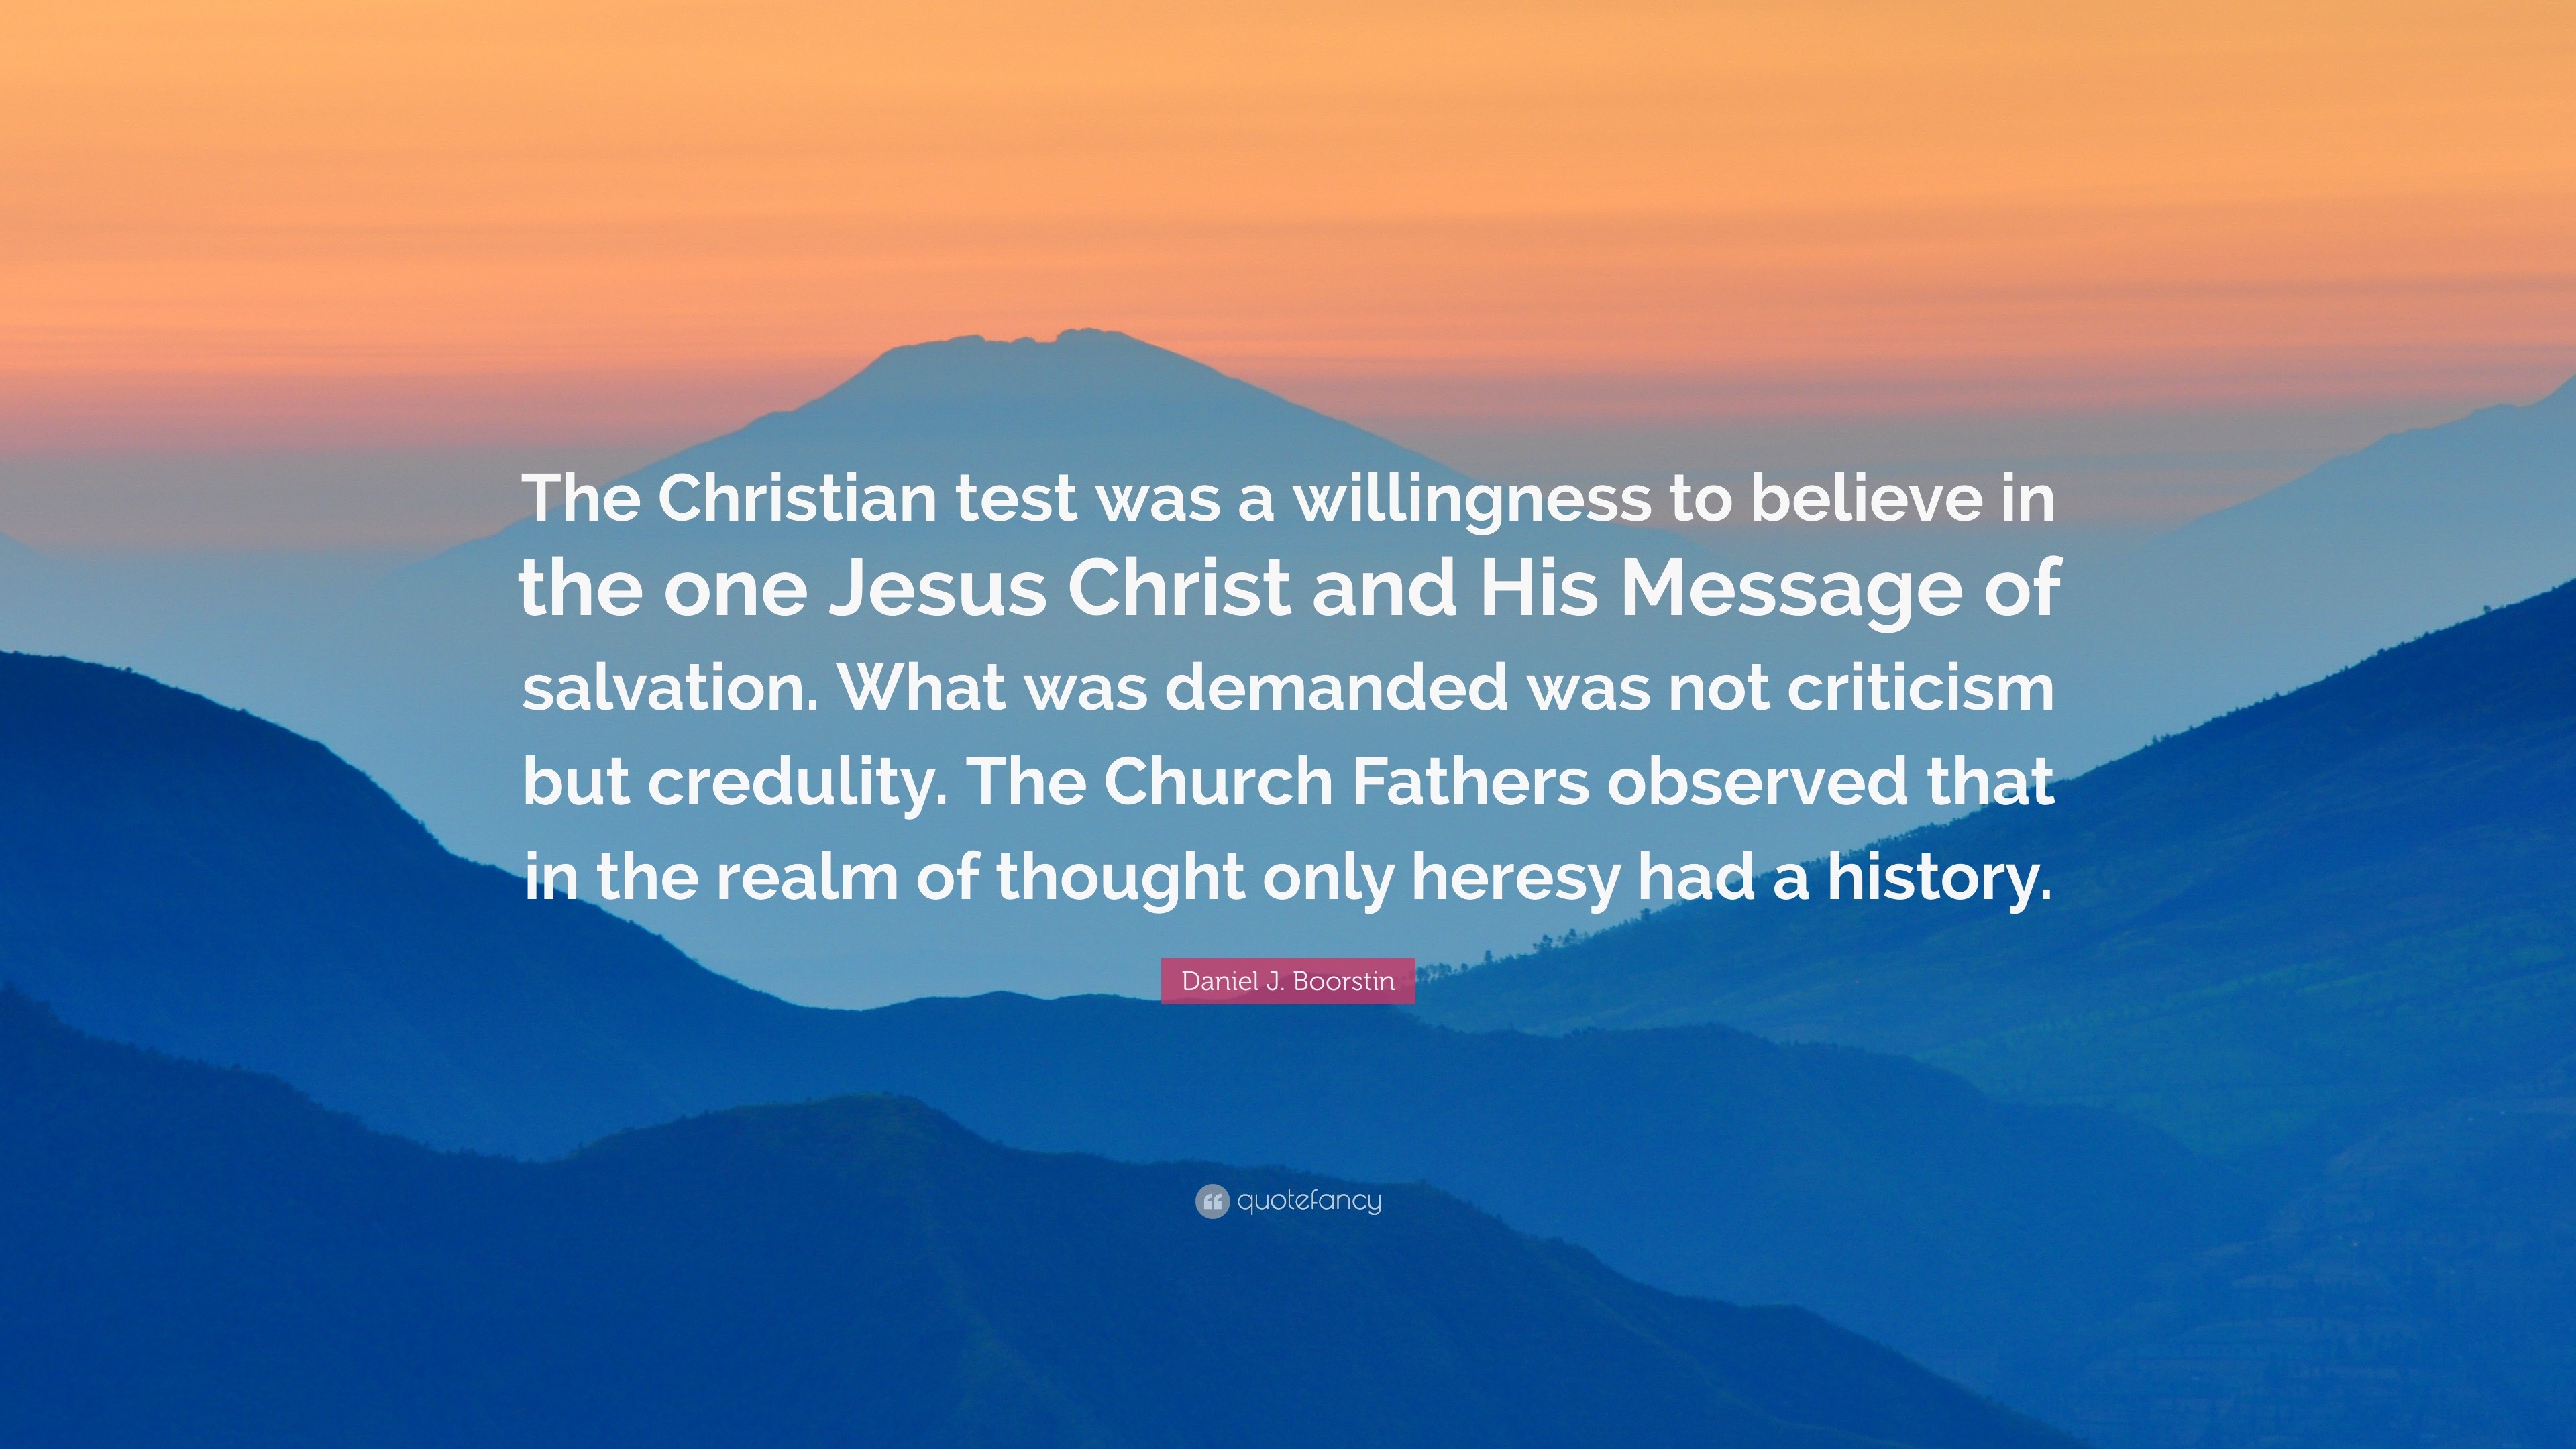 Daniel J. Boorstin Quote “The Christian test was a willingness to